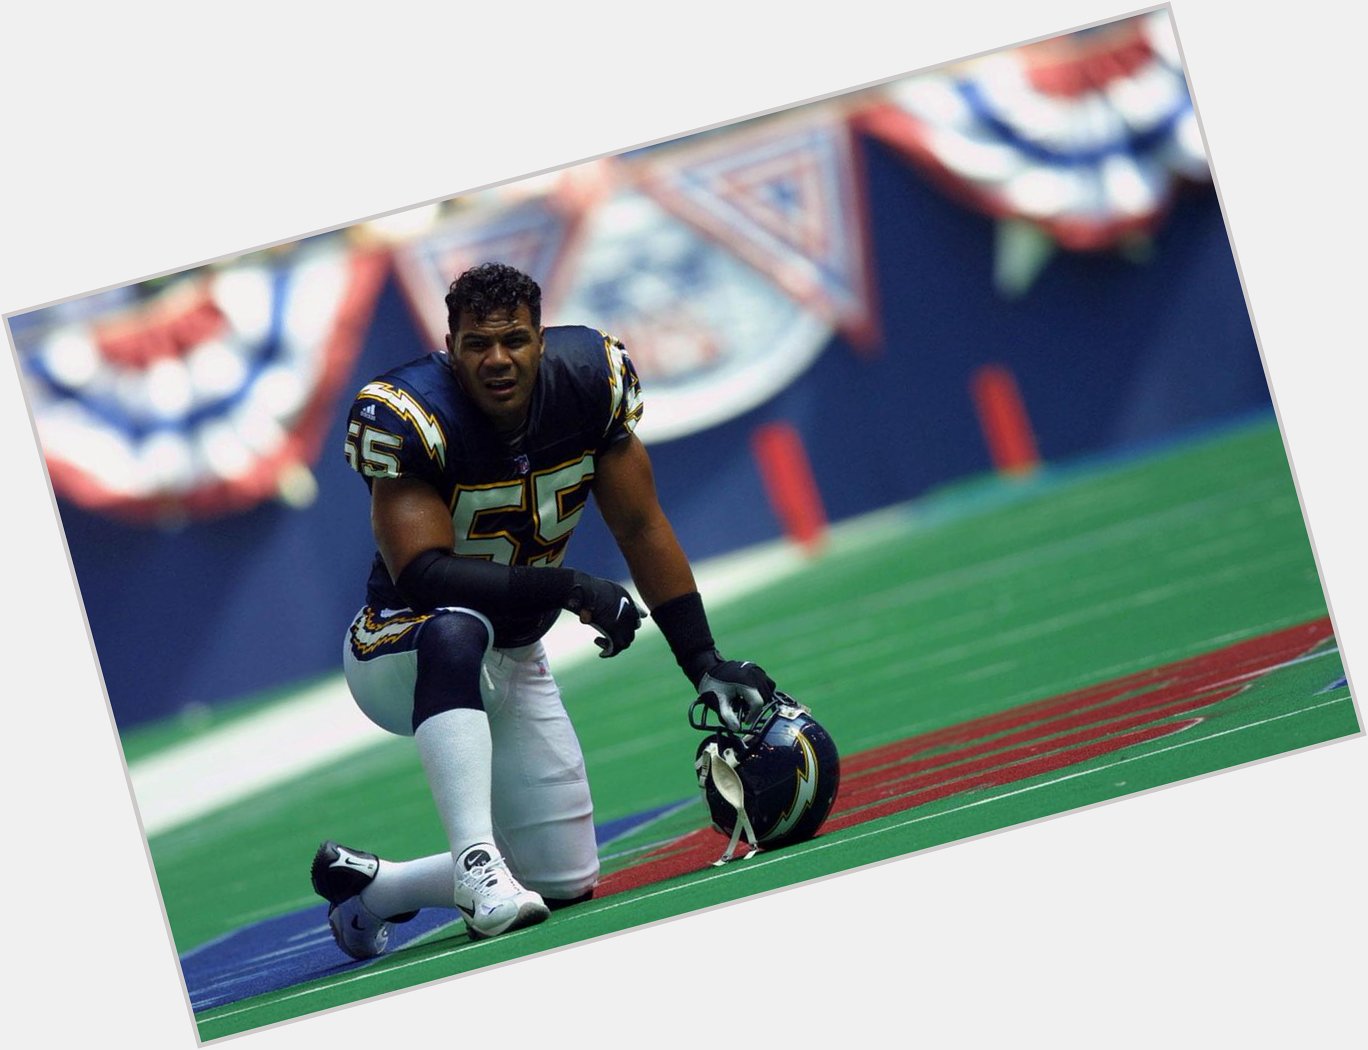 Happy Birthday to Junior Seau, who would have turned 46 today! 